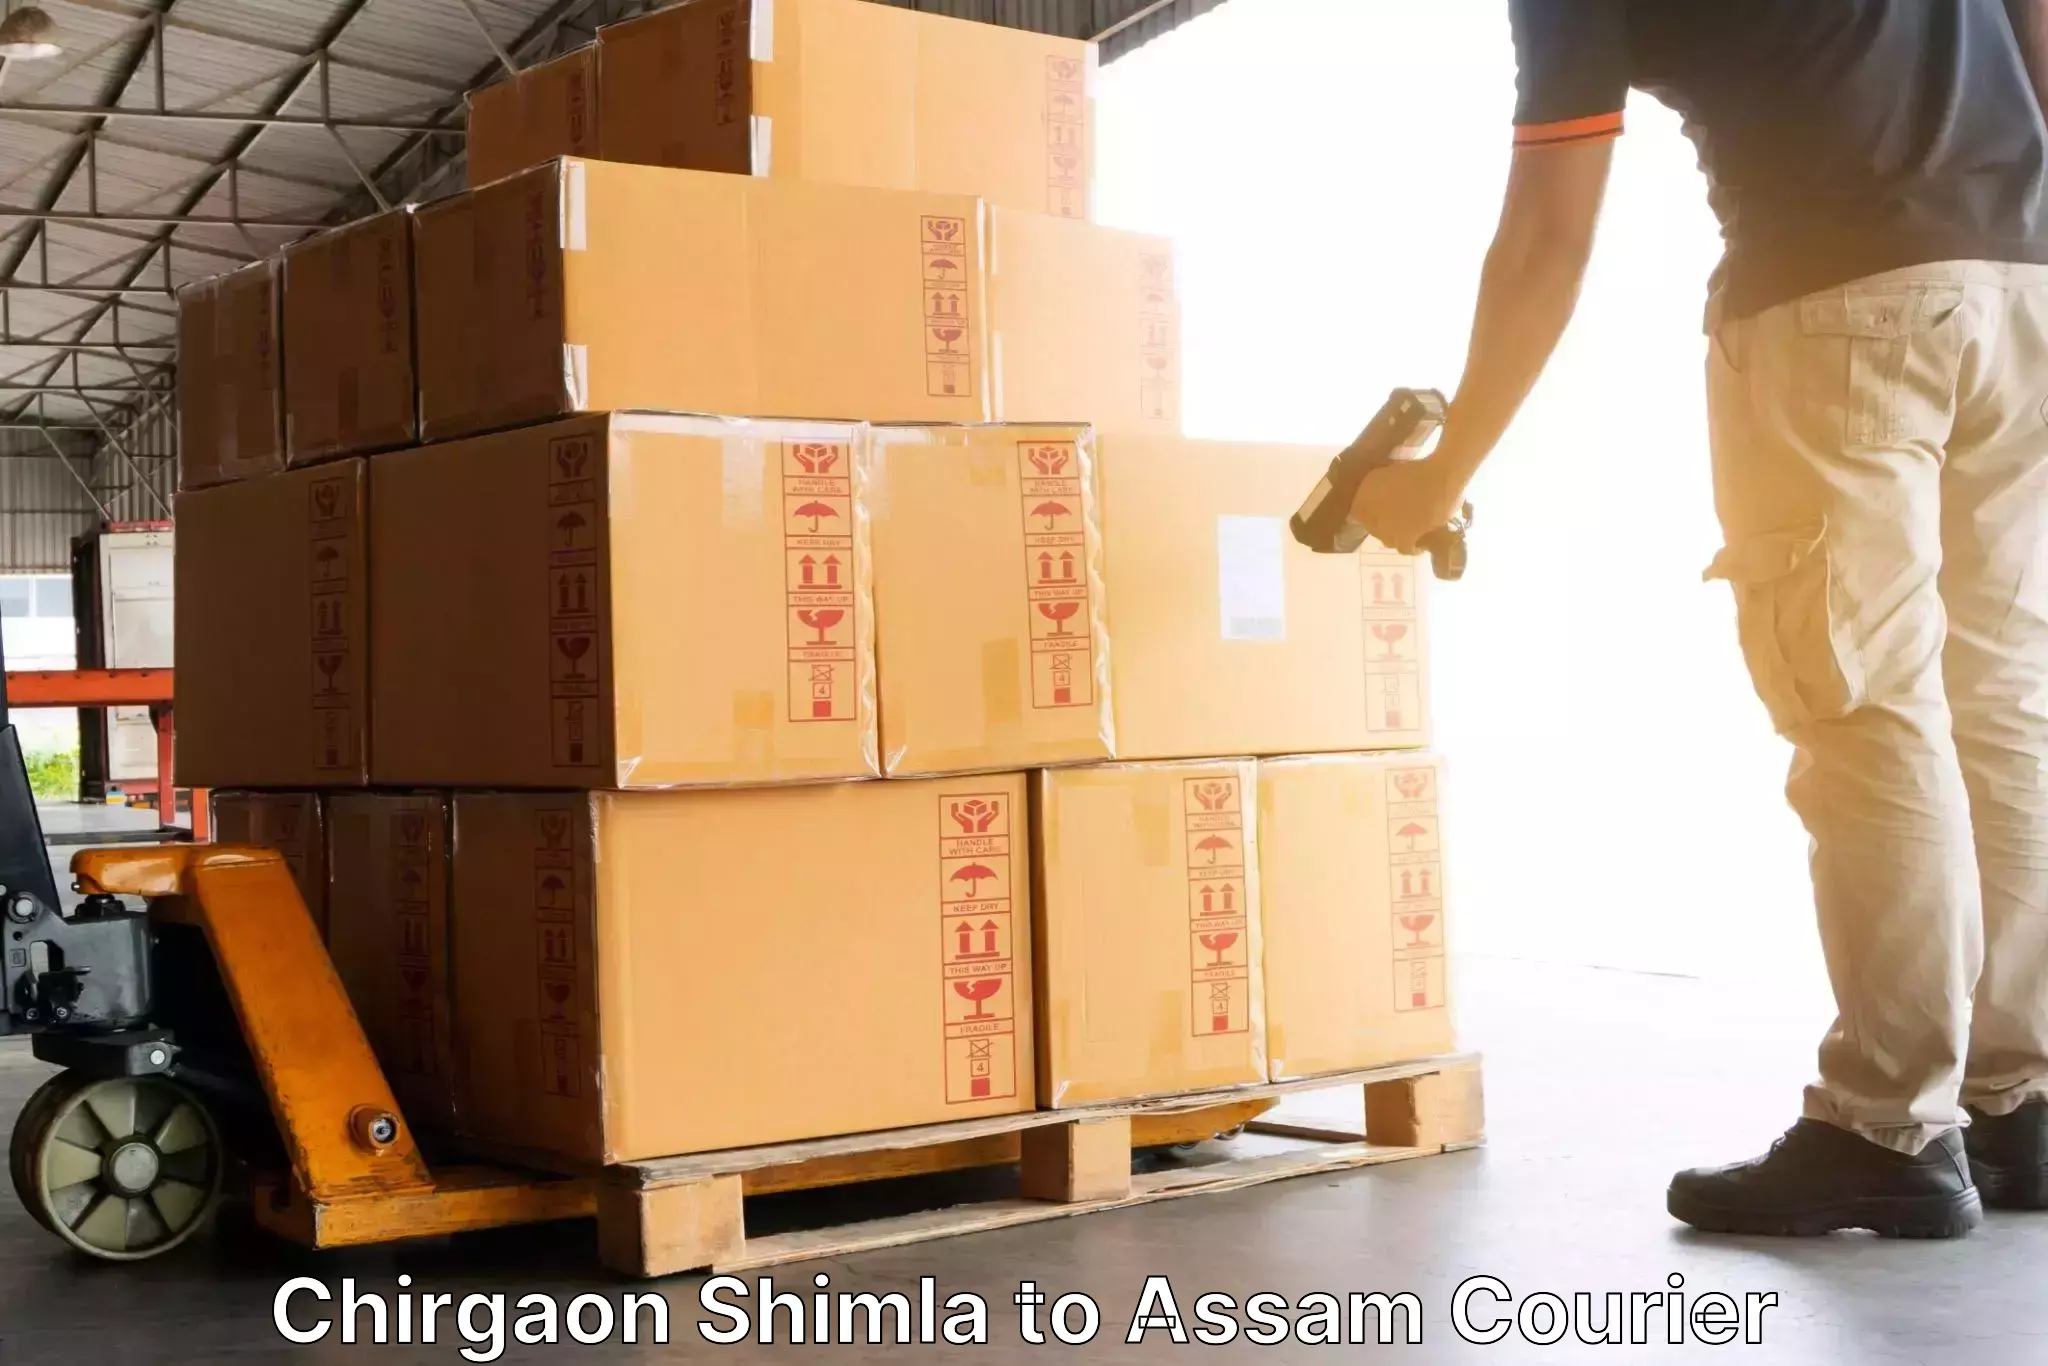 Easy access courier services Chirgaon Shimla to Udharbond